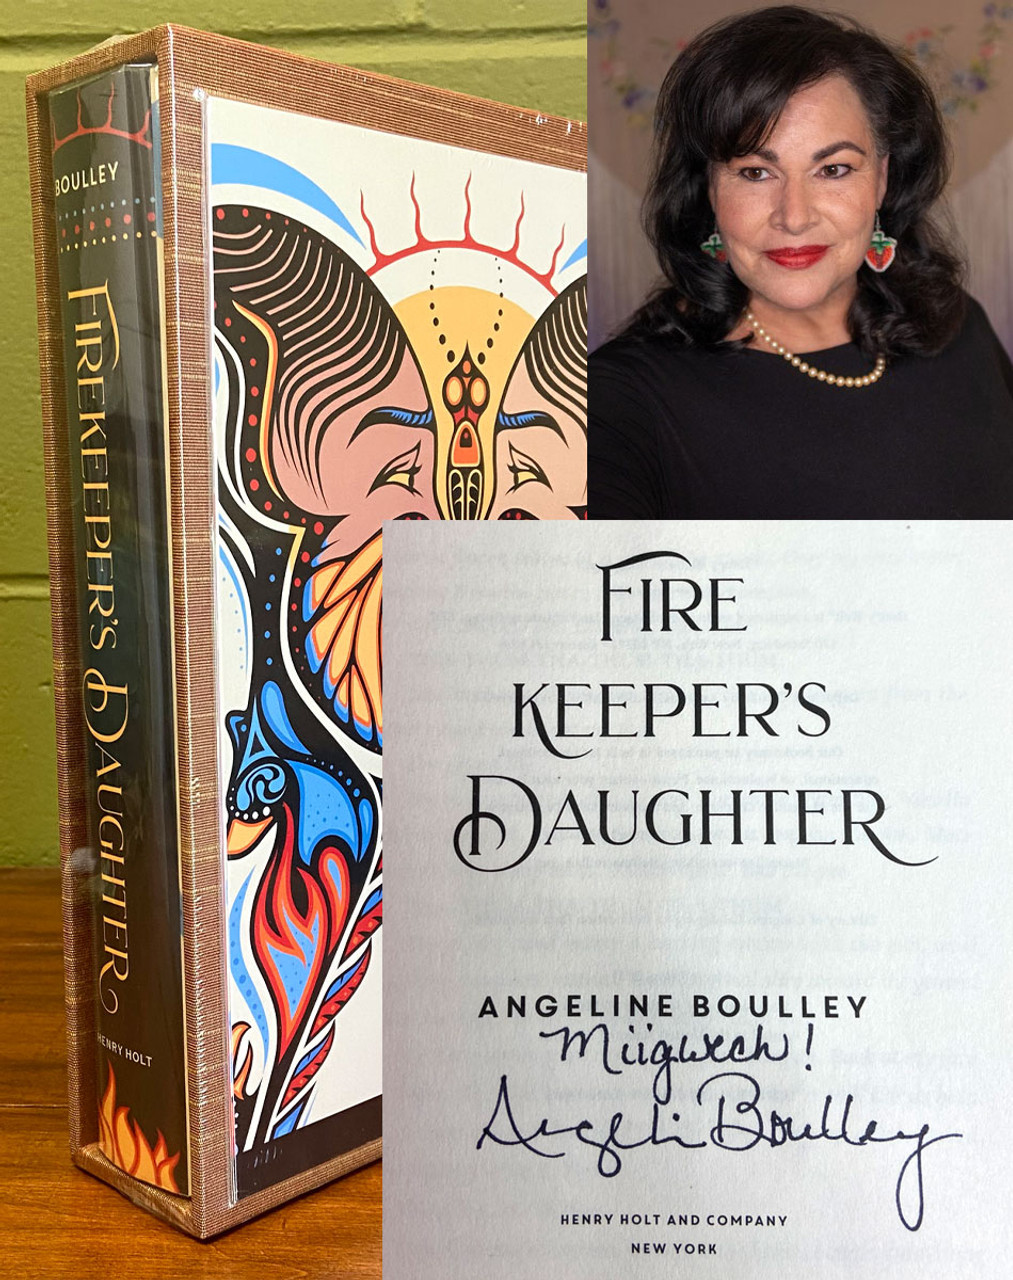 Angeline Boulley "Firekeeper's Daughter" Signed First Edition, First Printing, Slip-cased Limited Edition of 10 w/COA [Sealed]